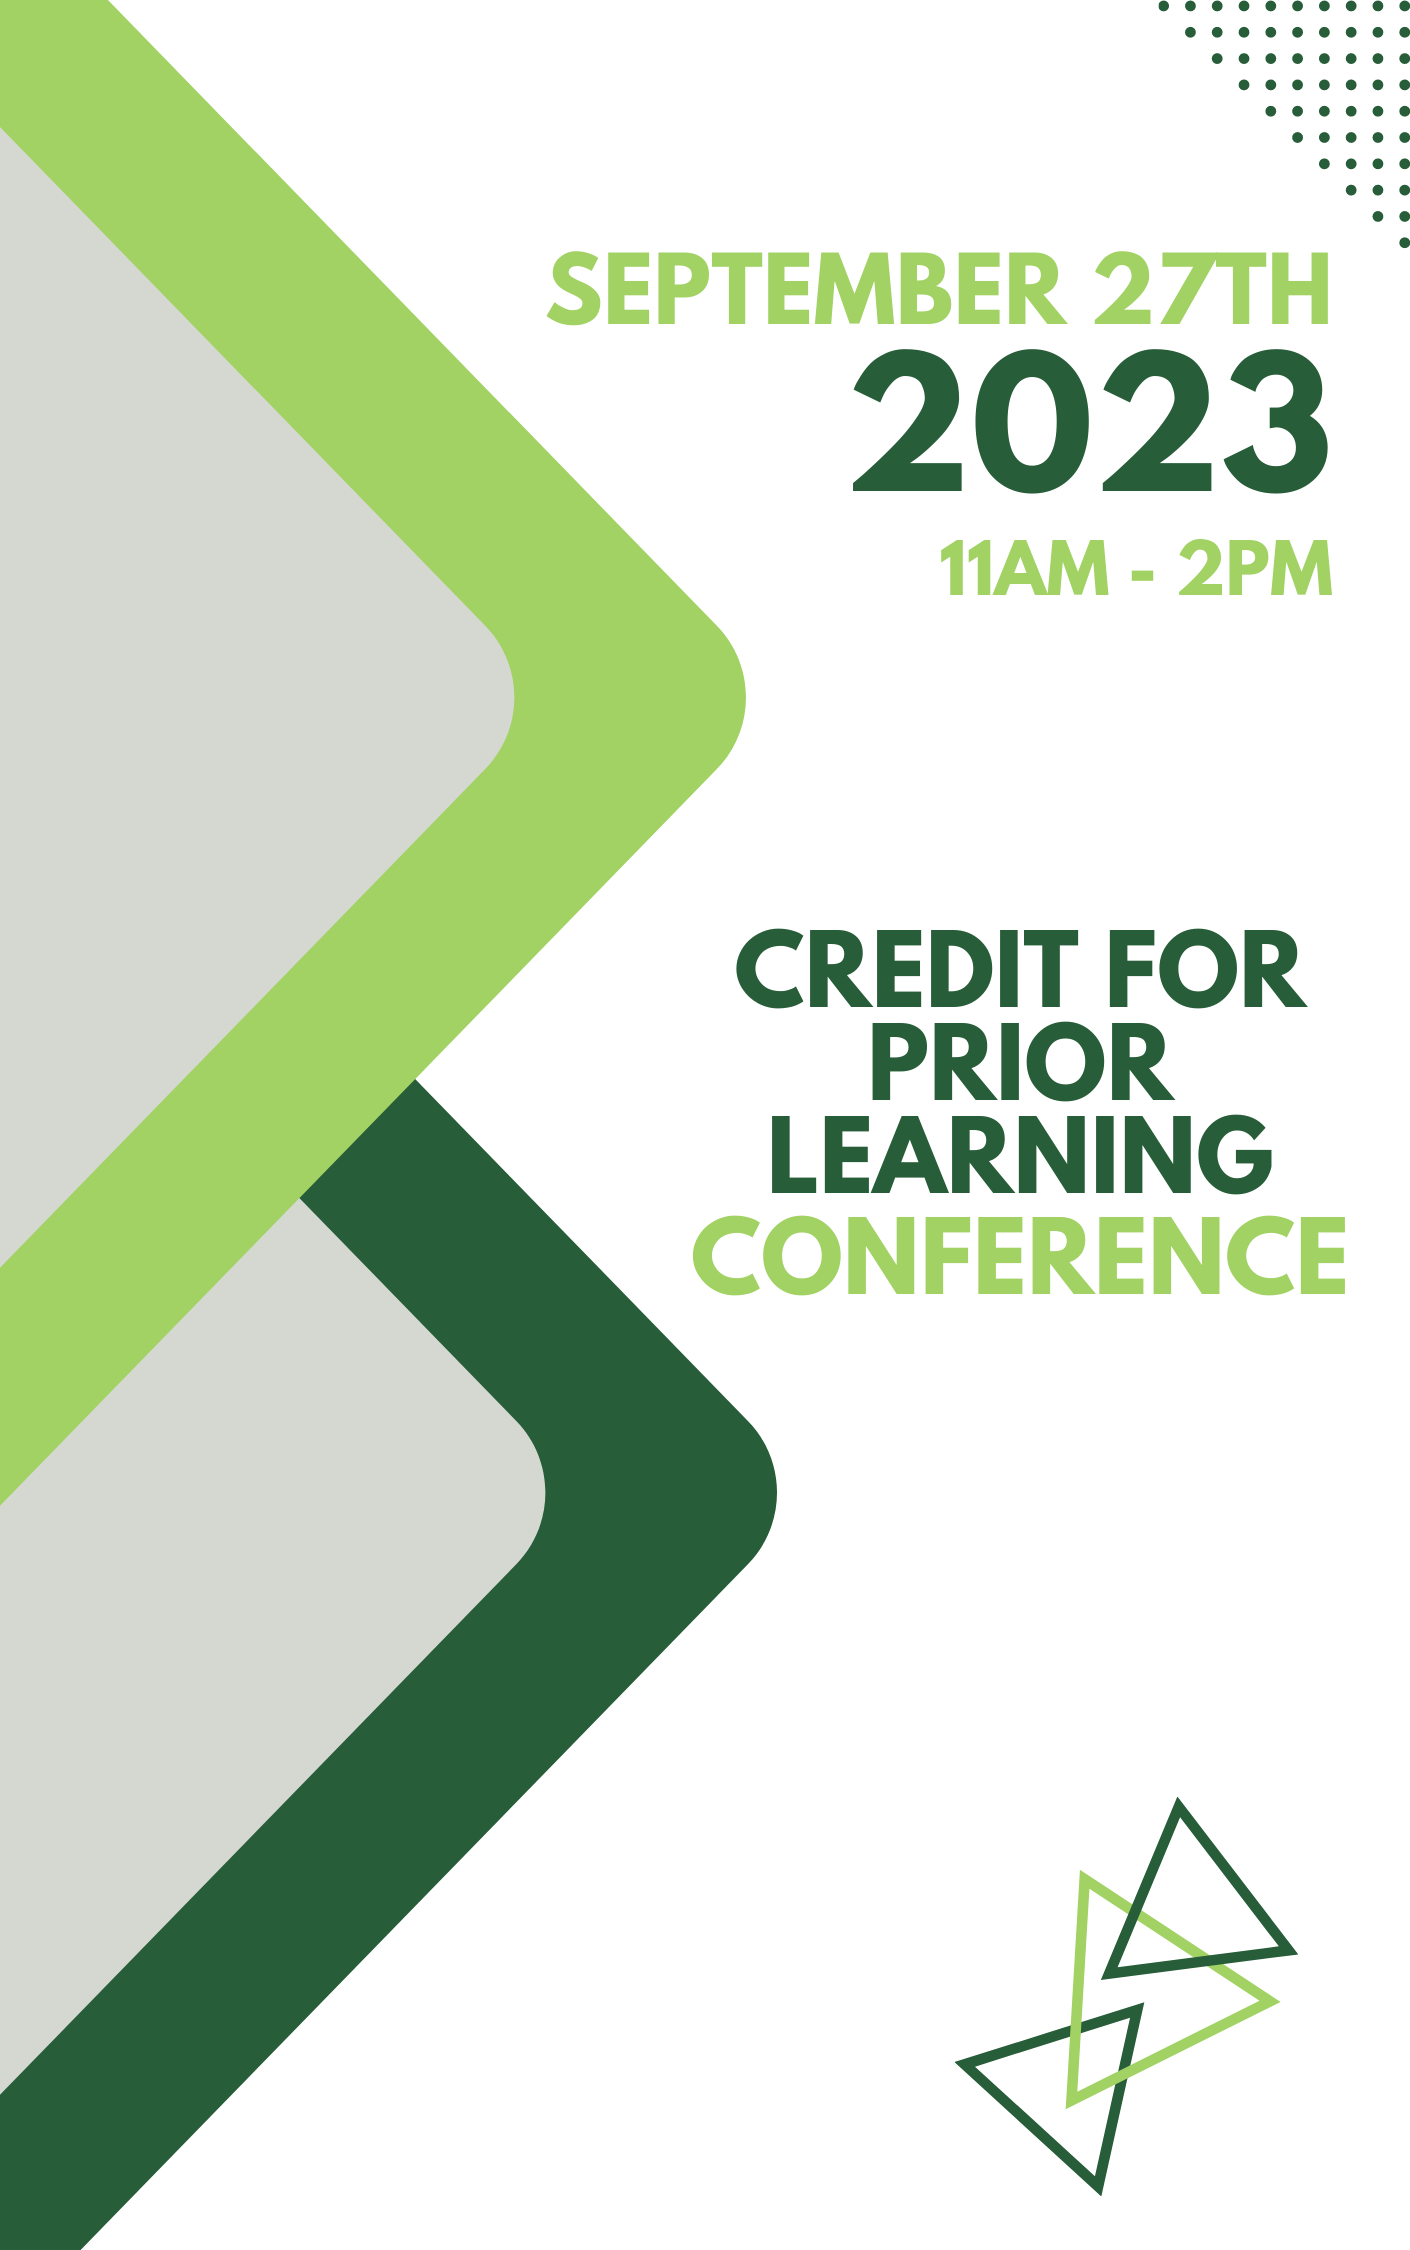 Credit for Prior Learning Conference Image